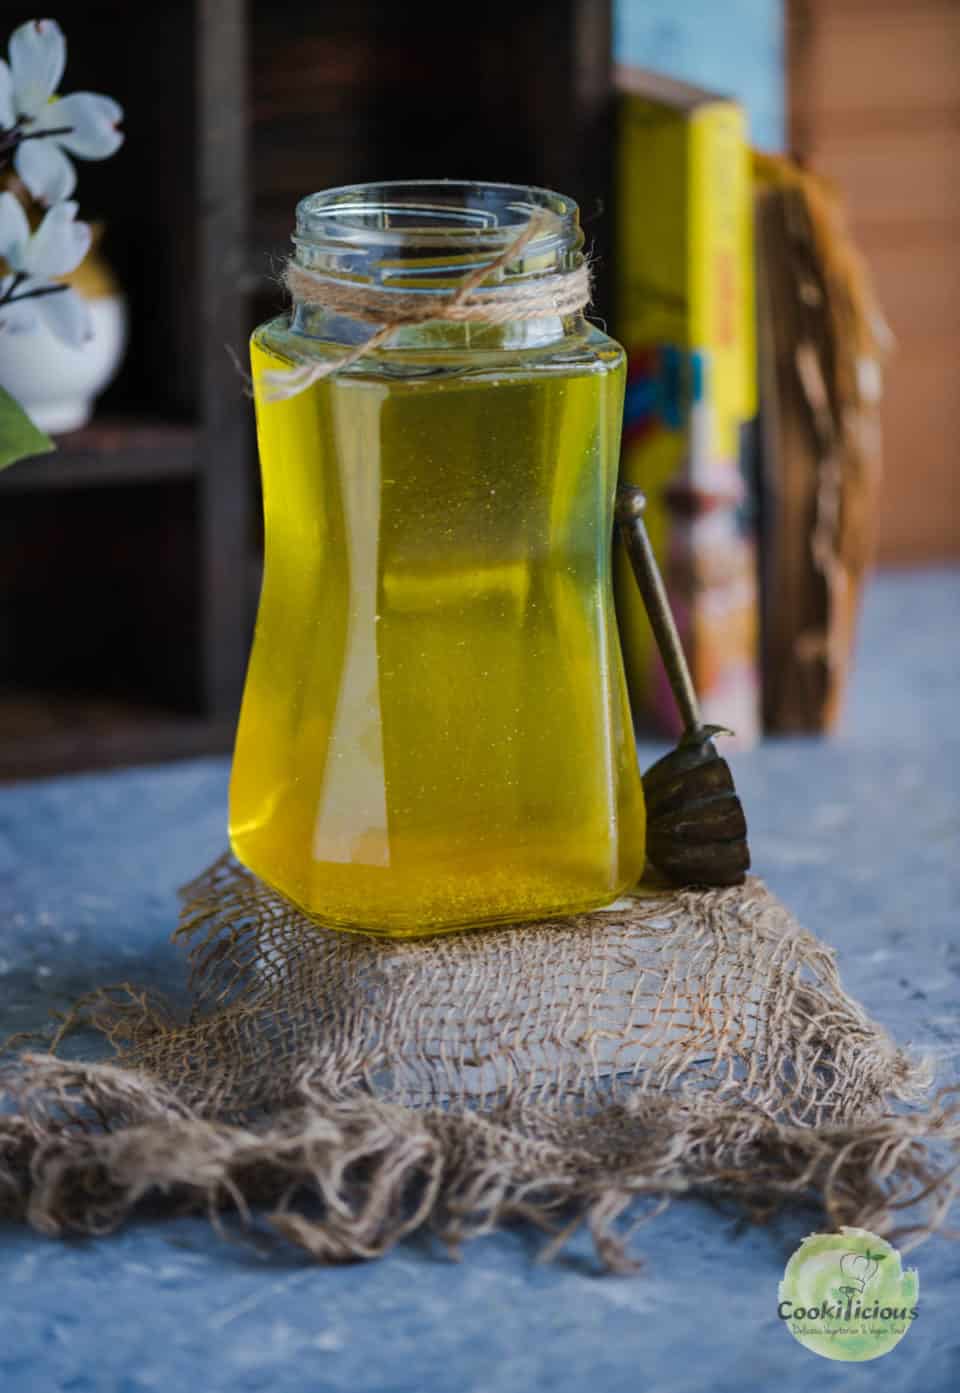 A spoon resting on a jar of dairy free ghee